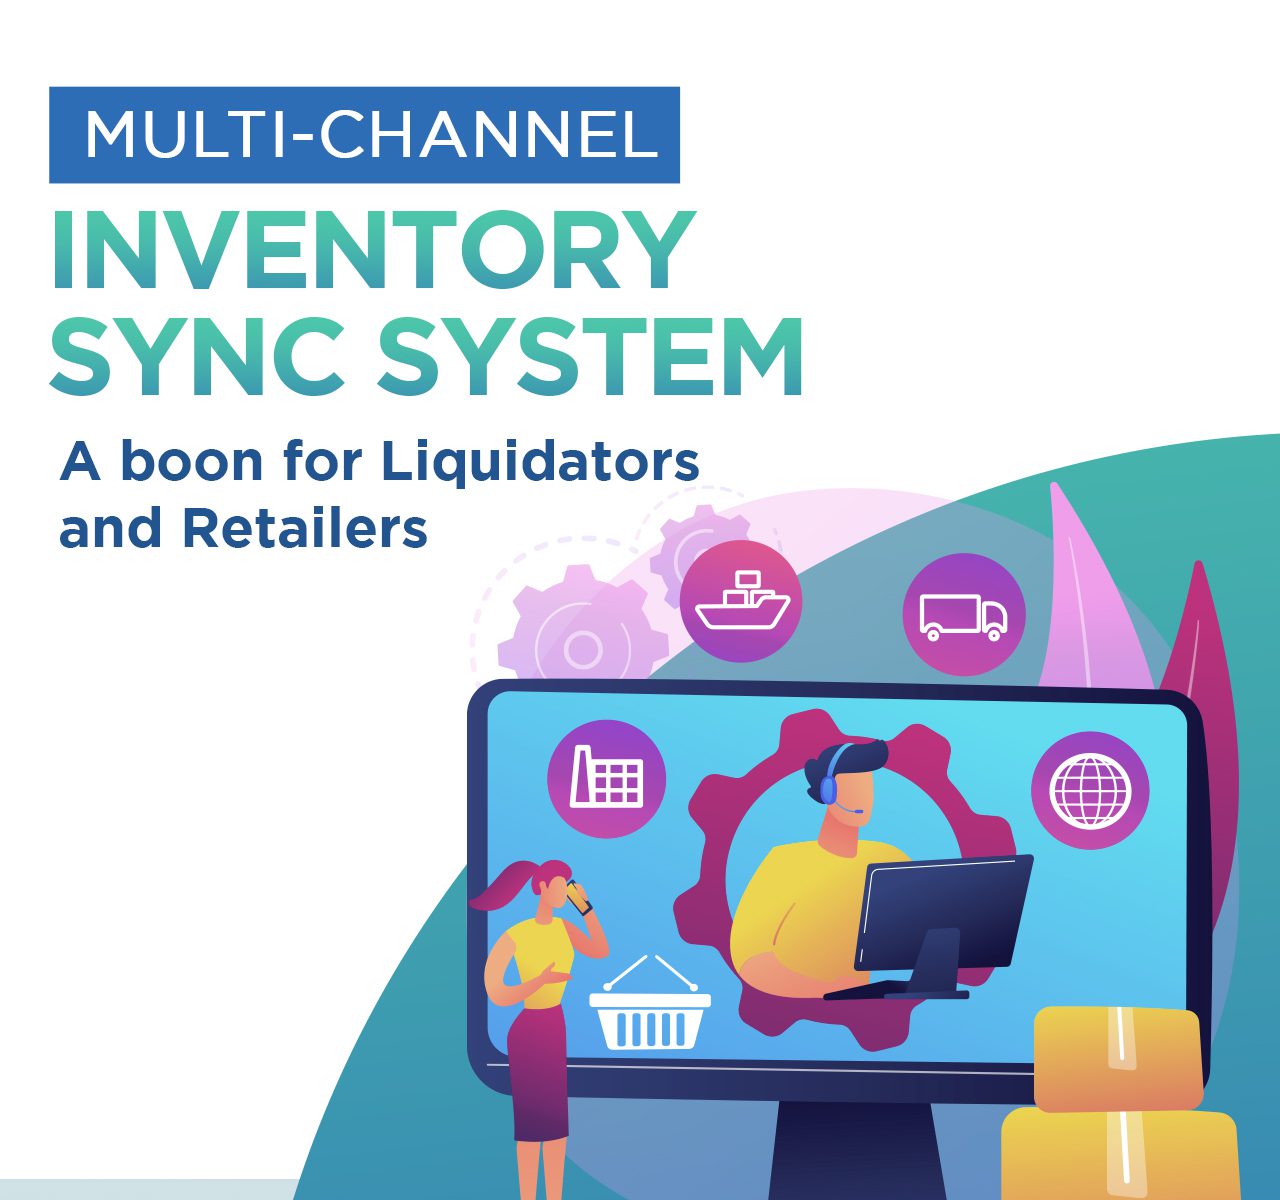 Multi-Channel Inventory Sync System - A Boon for Liquidators and Retailers